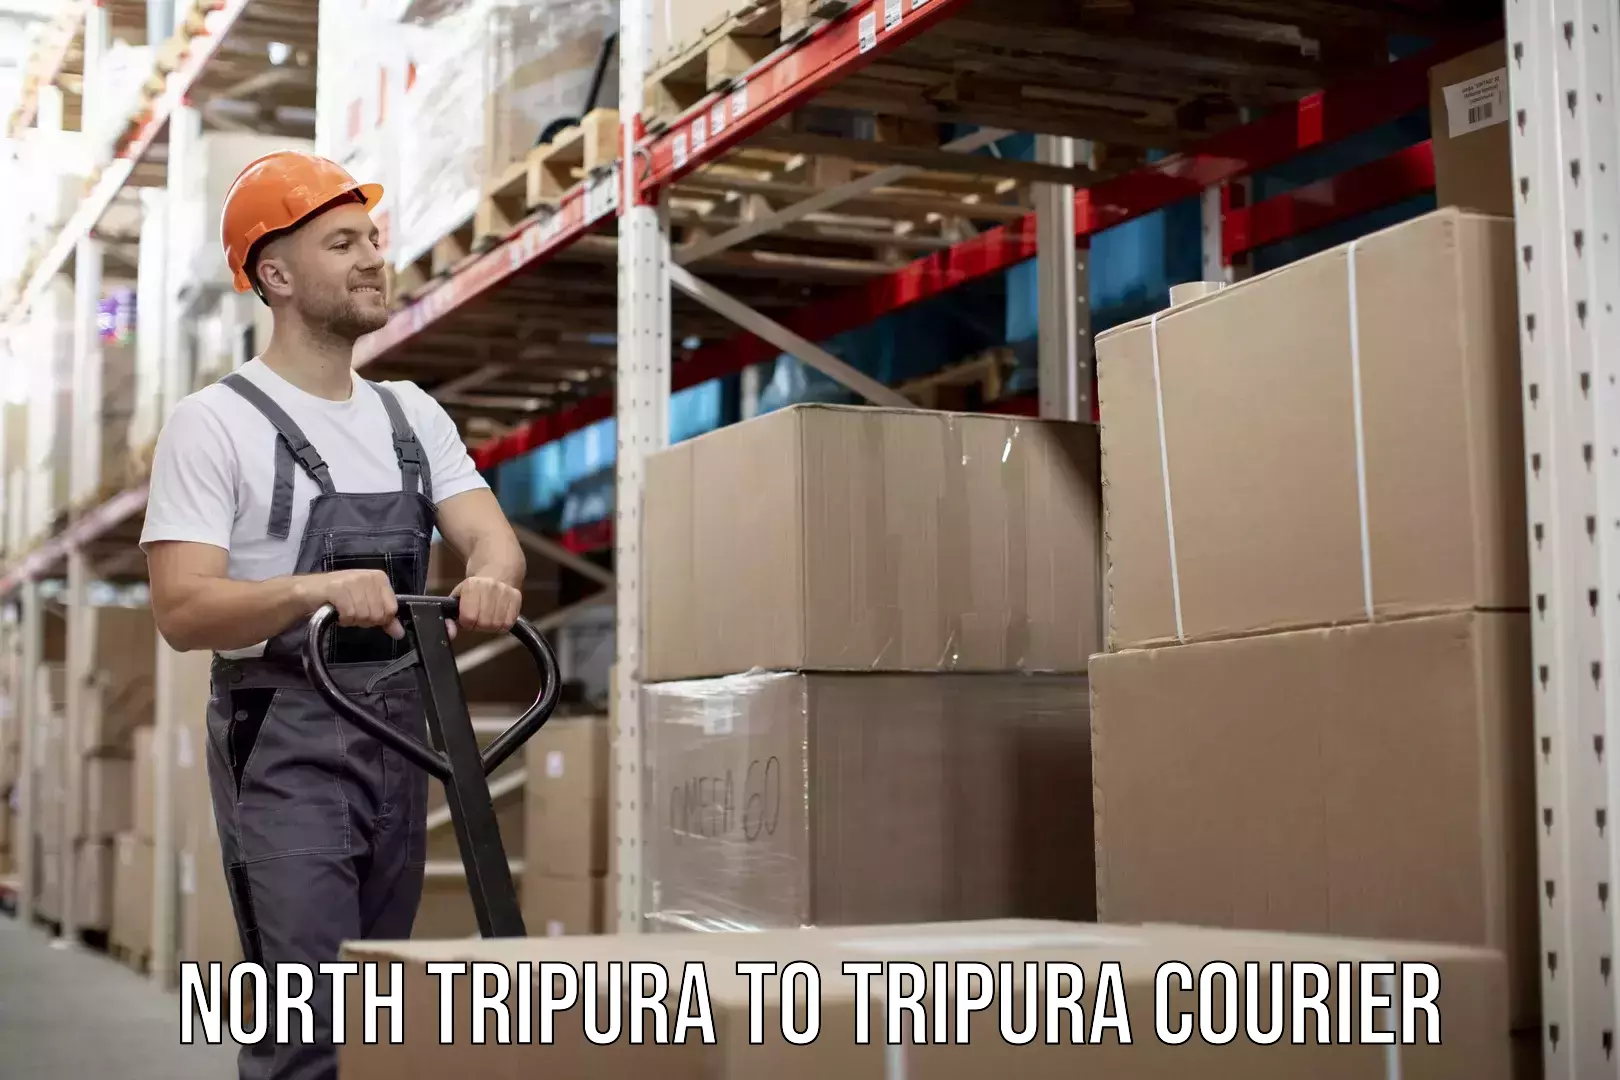 Courier service booking North Tripura to Tripura